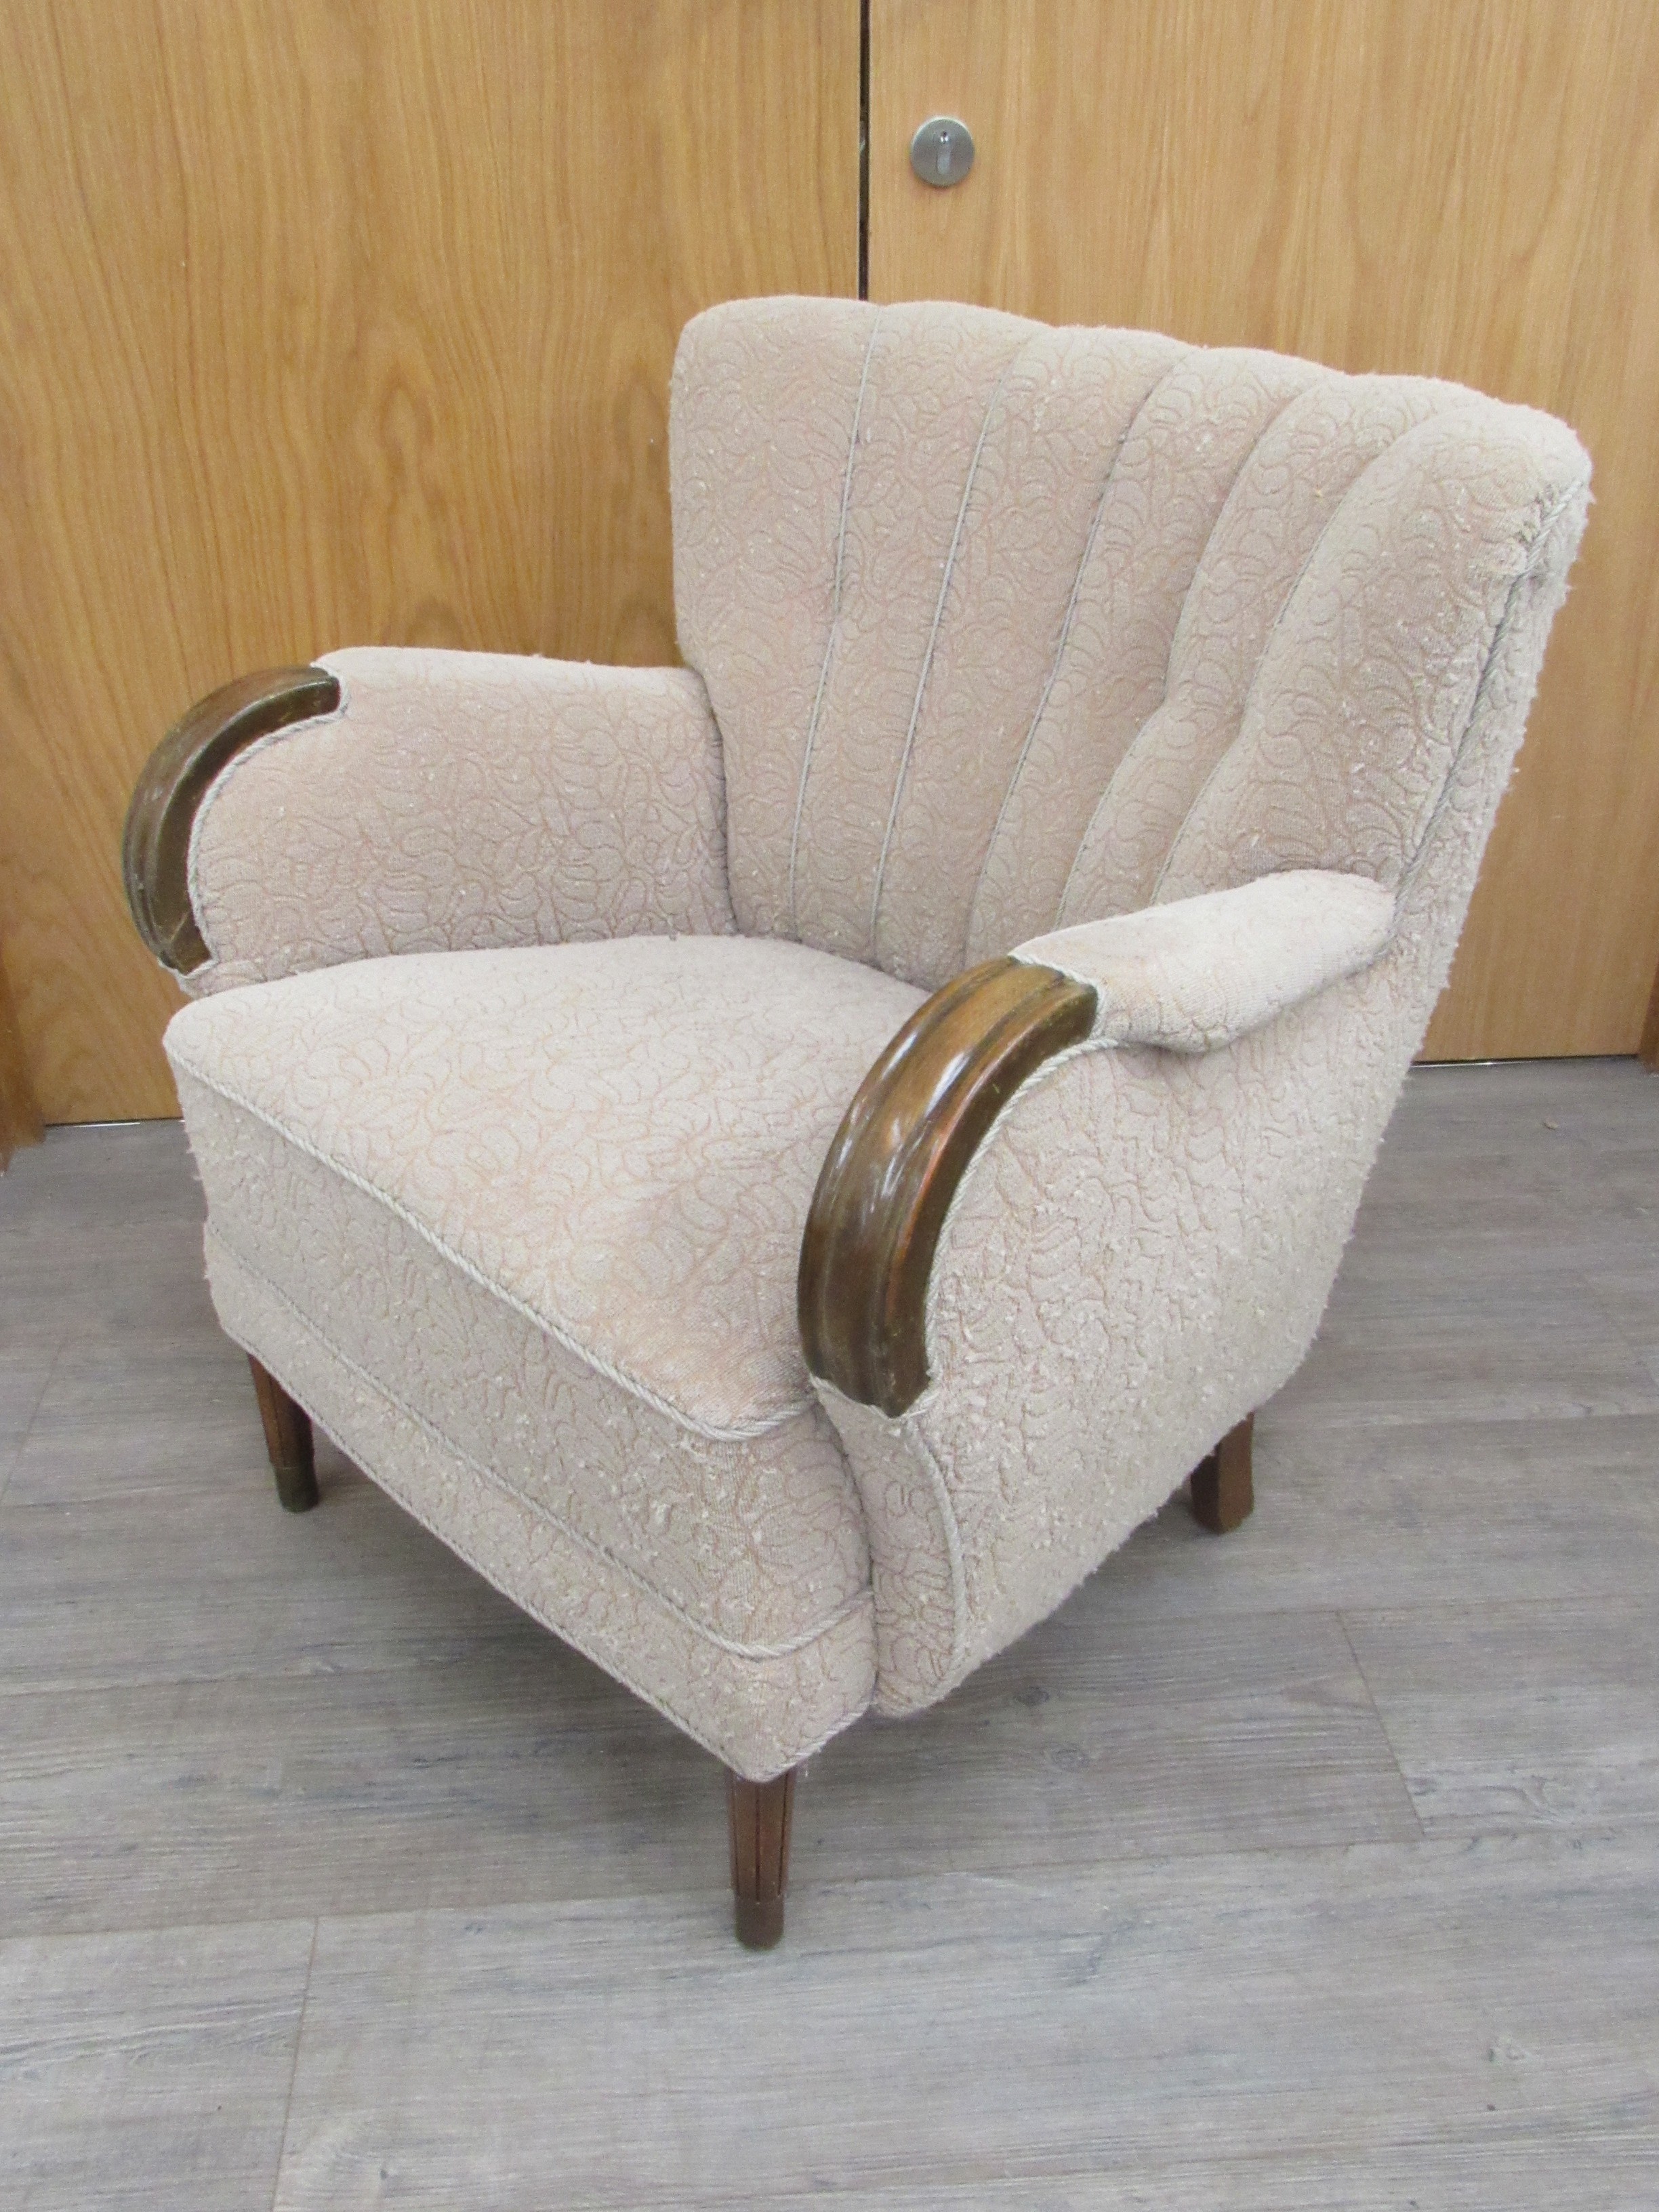 A 1940's Danish armchair original embossed upholstery in oatmeal colours, dark stained wooden arms - Image 2 of 2